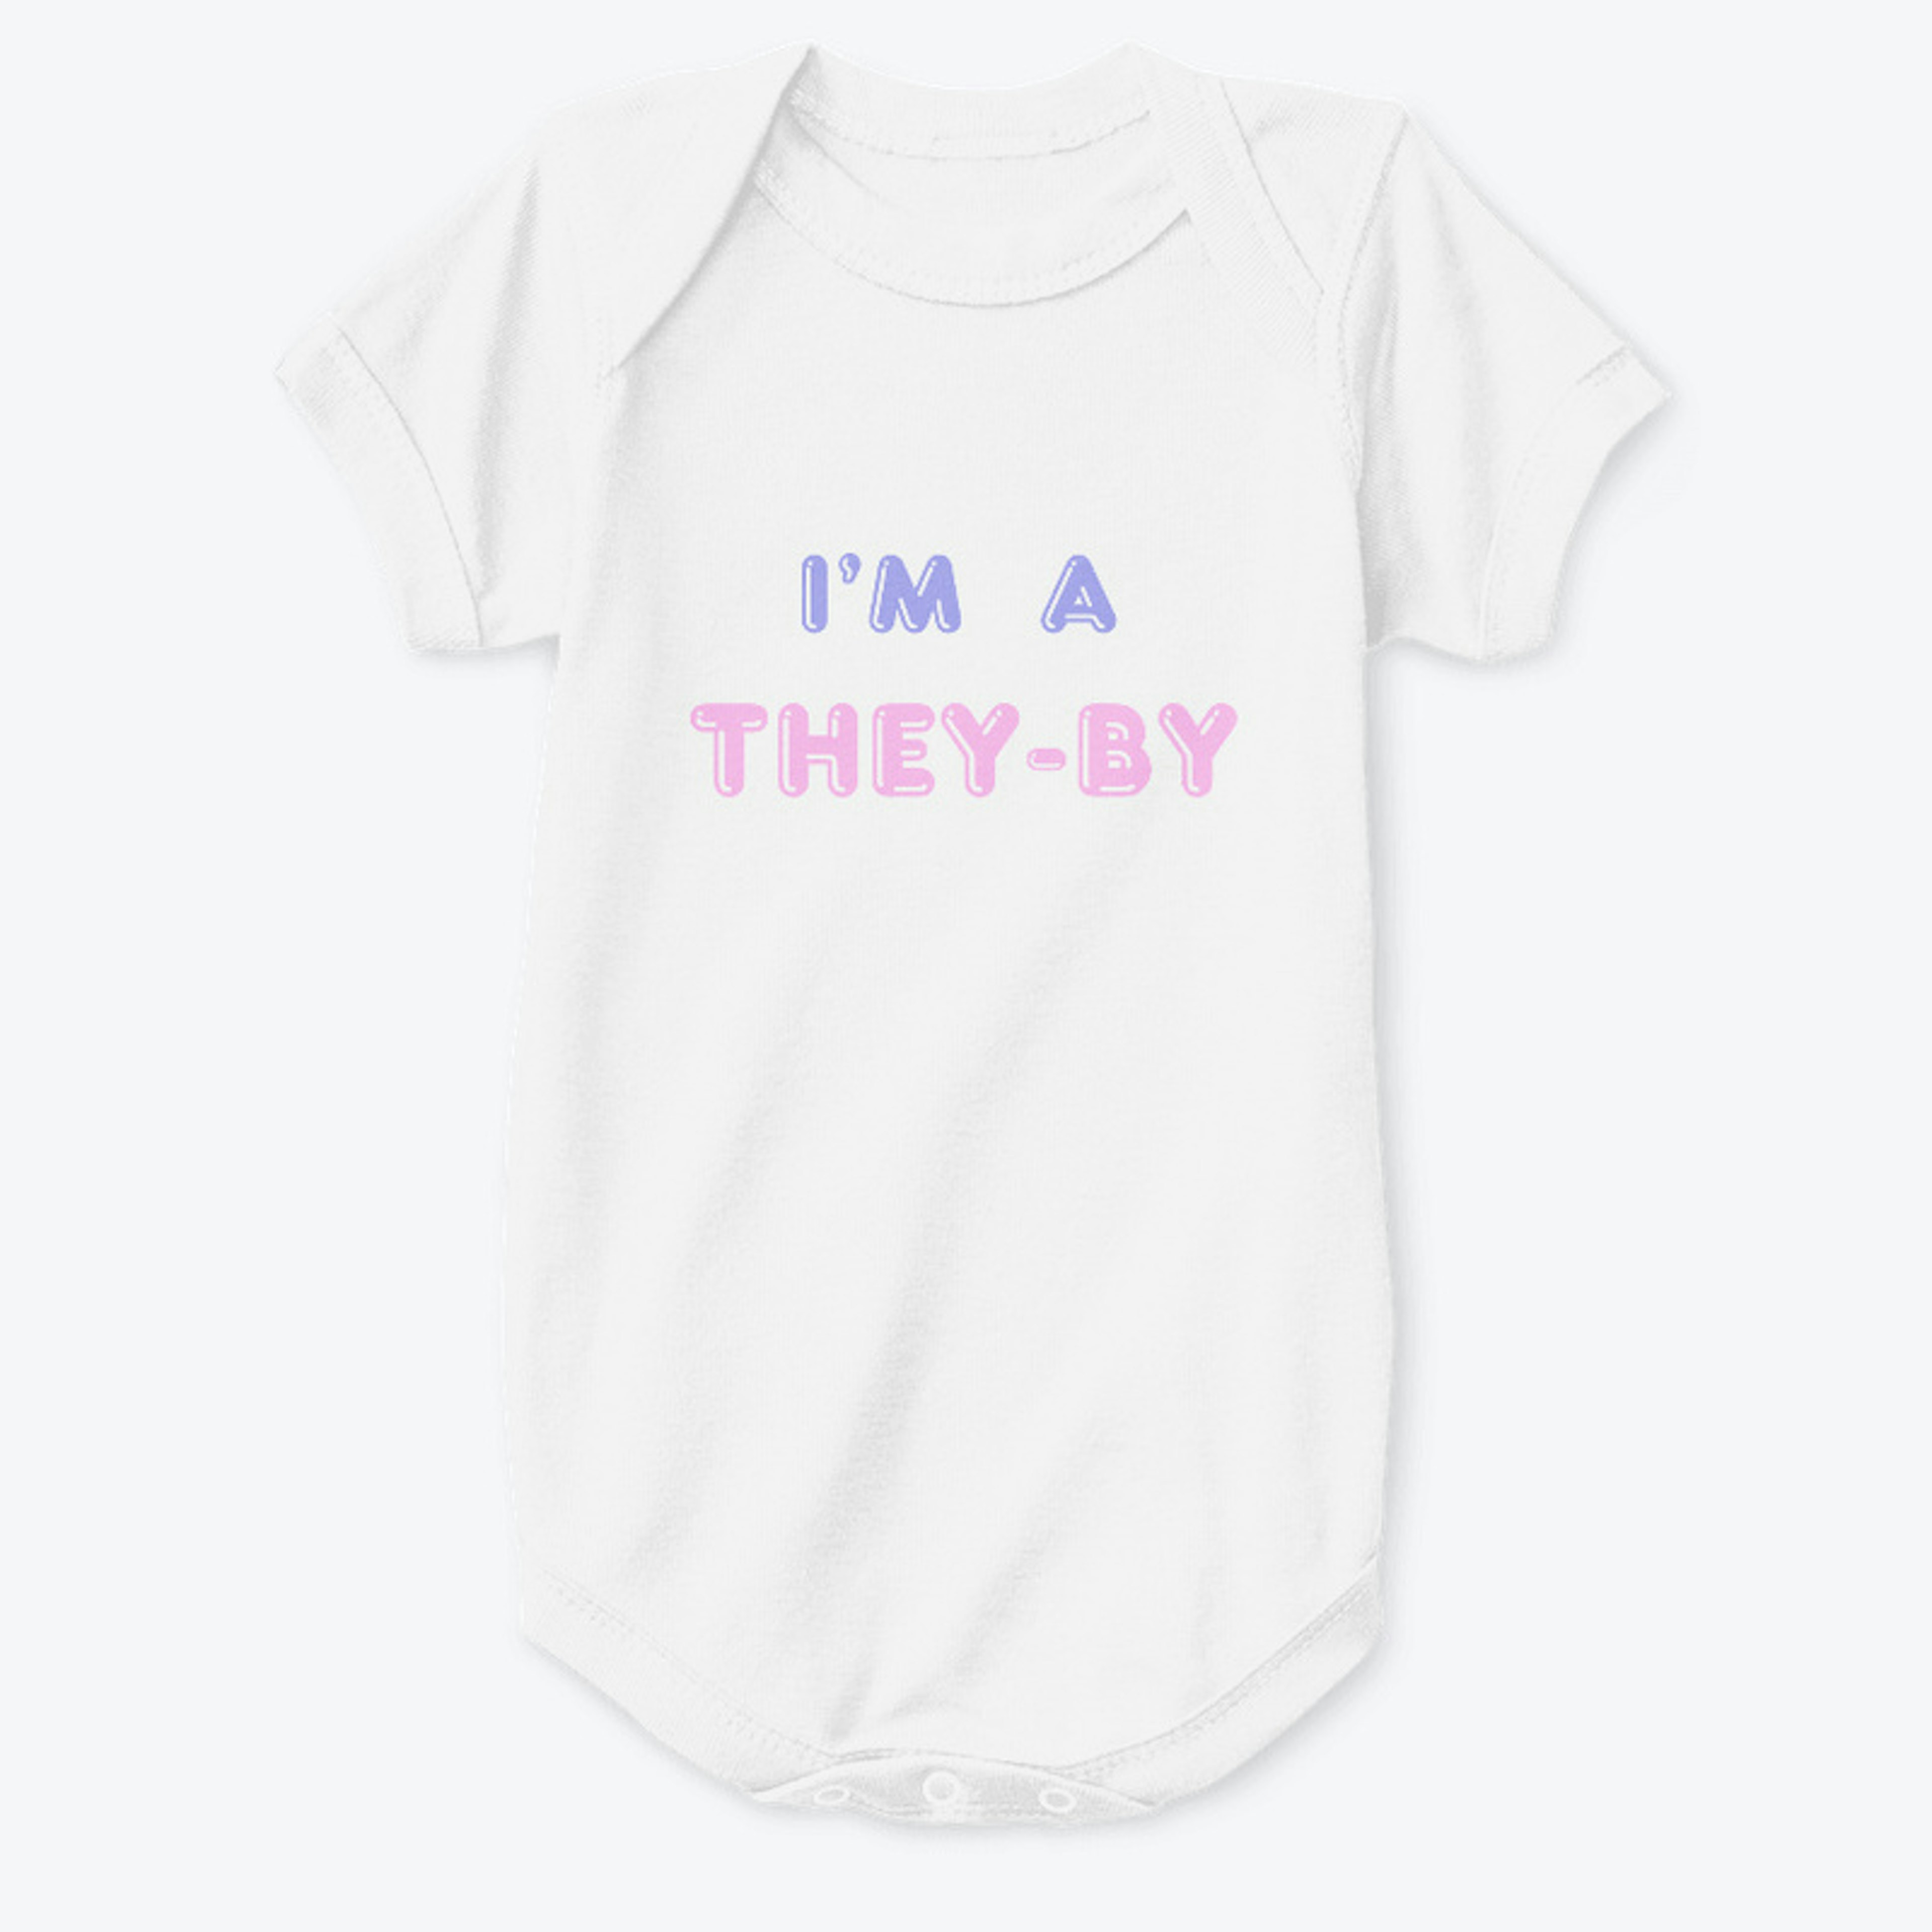 They-by Baby onesie